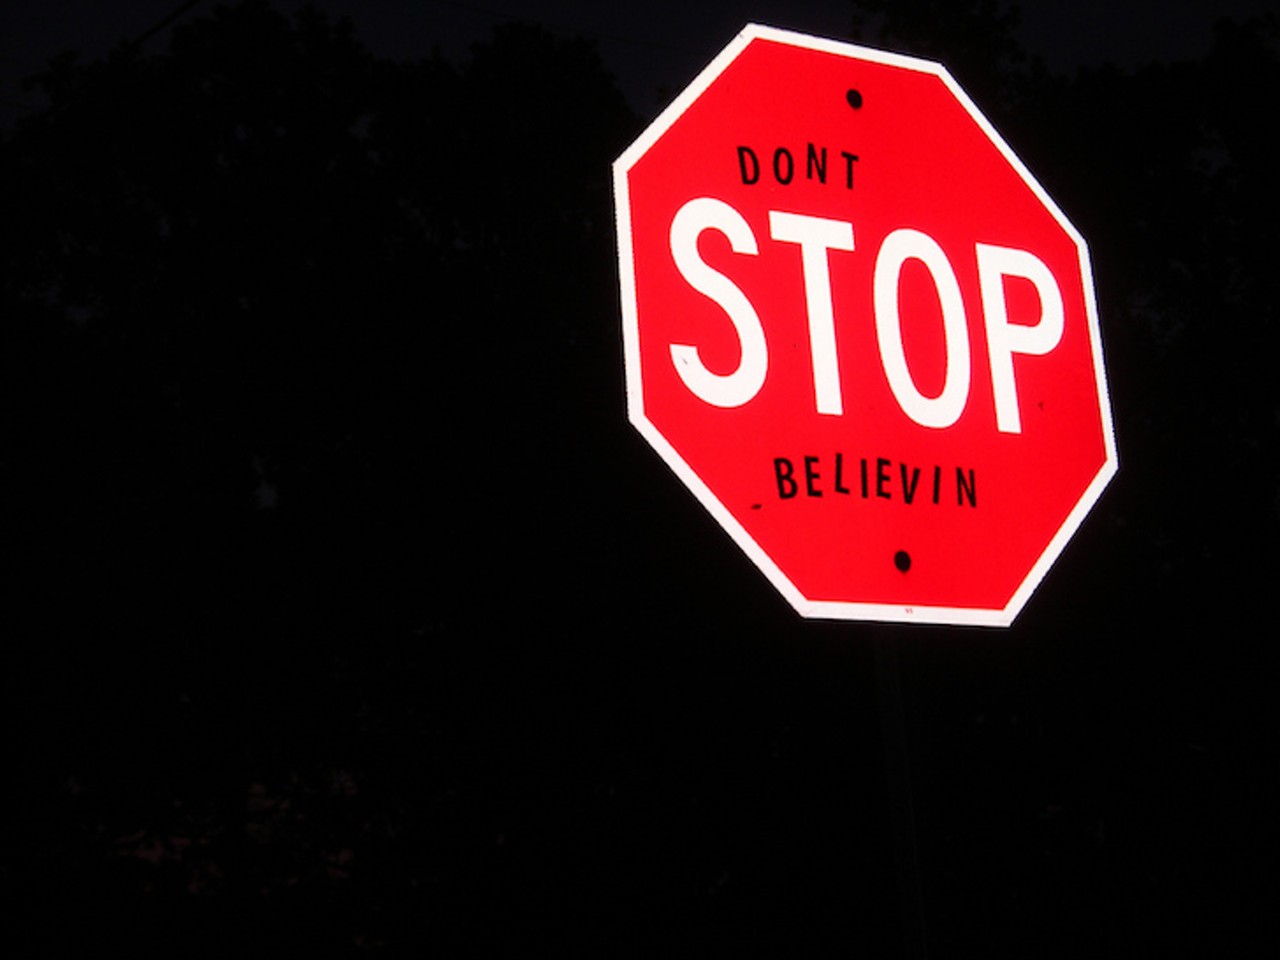 &#148;Don&#146;t Stop Believin&#146;&#148;
You know the line. You&#146;ve sung it in the third period at Red Wings games. You&#146;ve joked about how there&#146;s no such thing as south Detroit because that&#146;d be Windsor. Why do we keep doing it? We must love it.
Photo courtesy of kaitlyn / Flickr